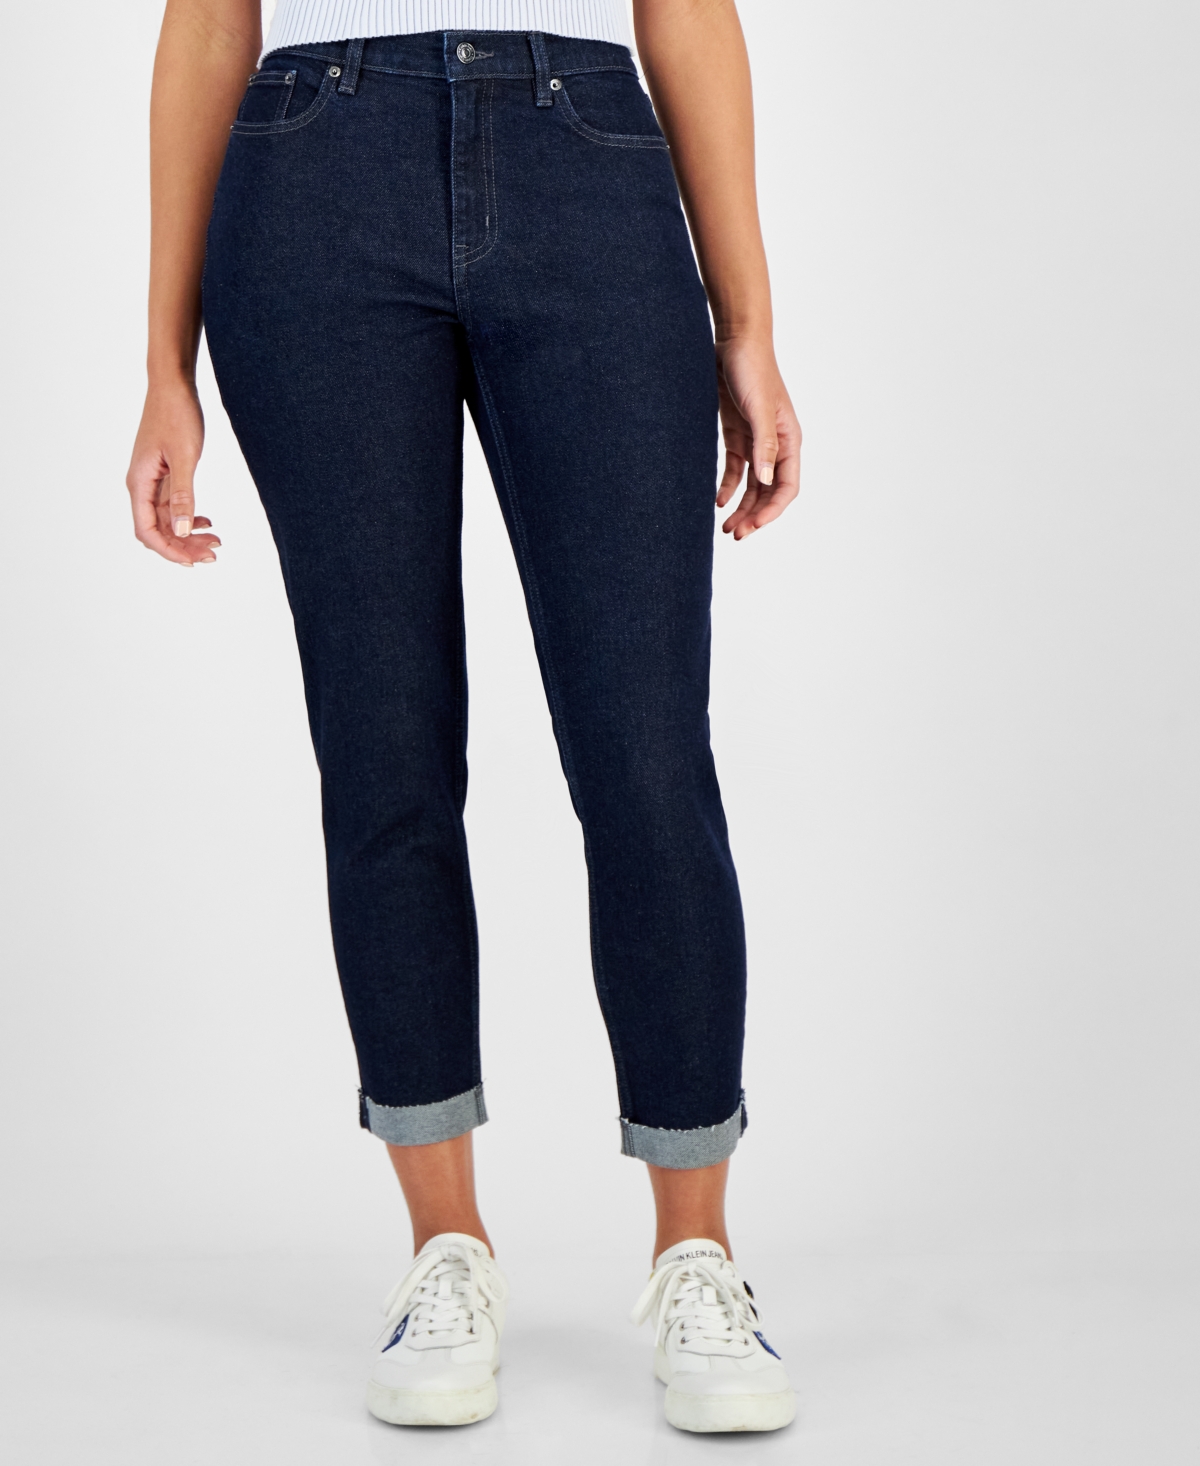 Calvin Klein Jeans Est.1978 Women's Mid-rise Tapered Slim Jeans In Concord